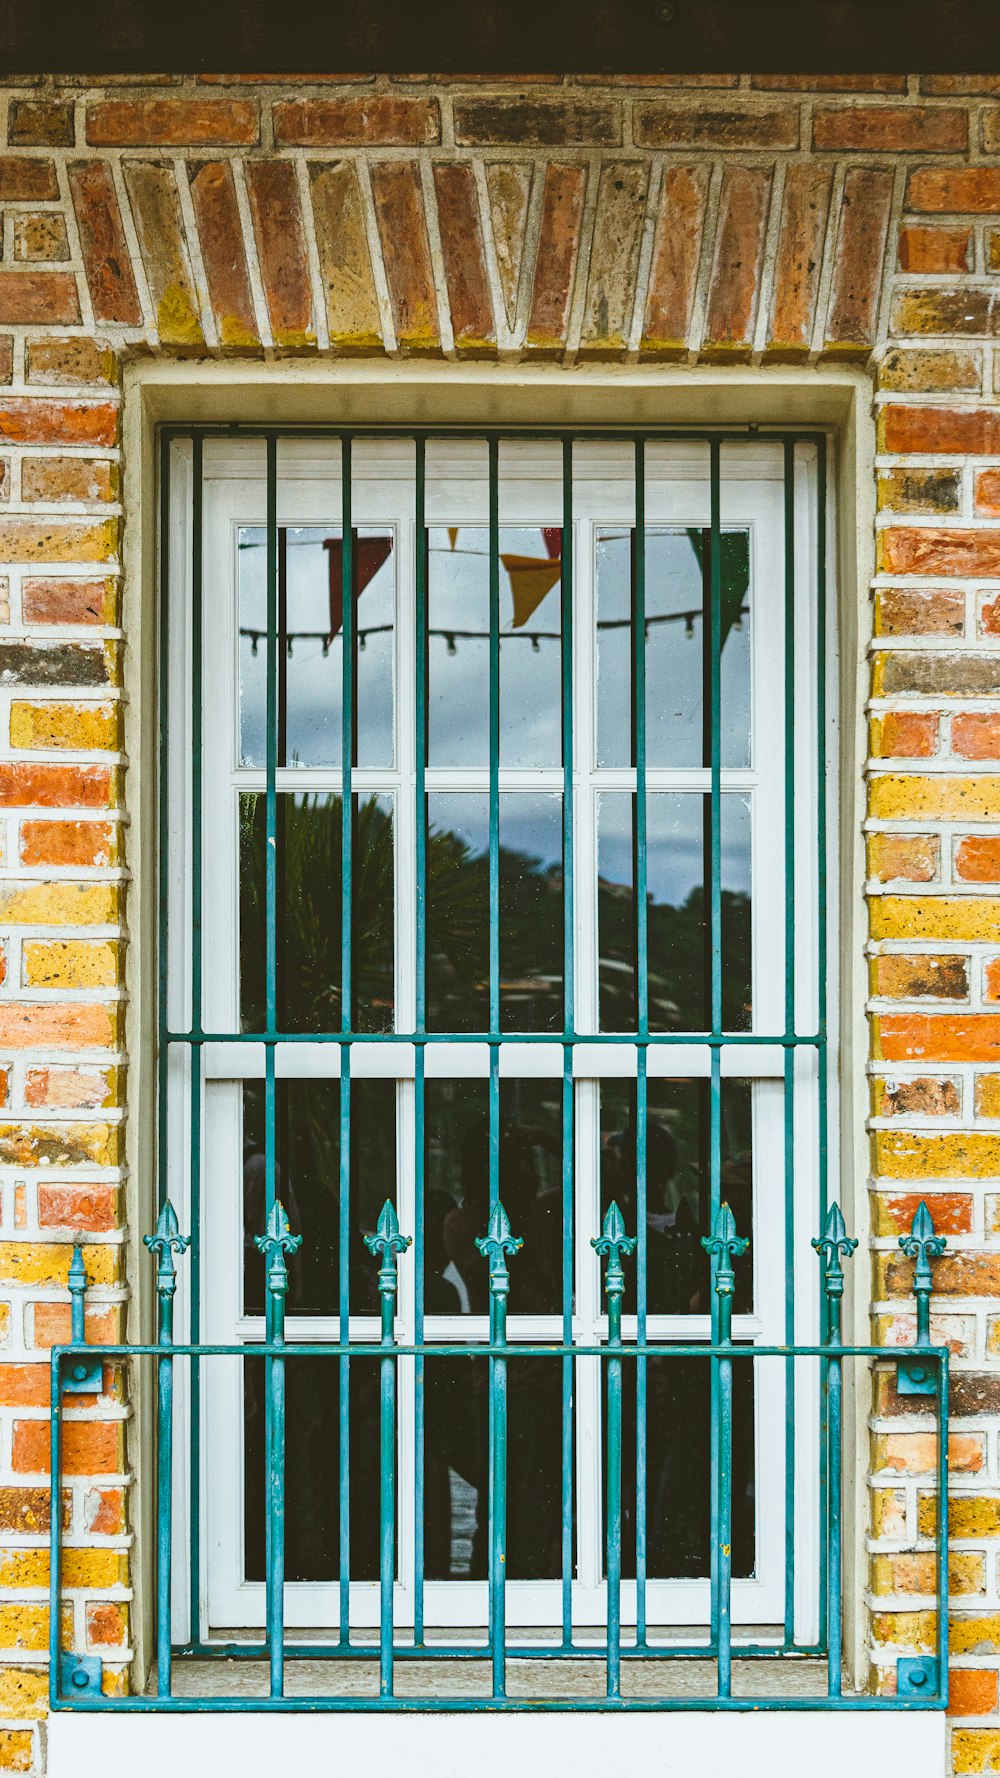 a window with bars and a bench in front of it